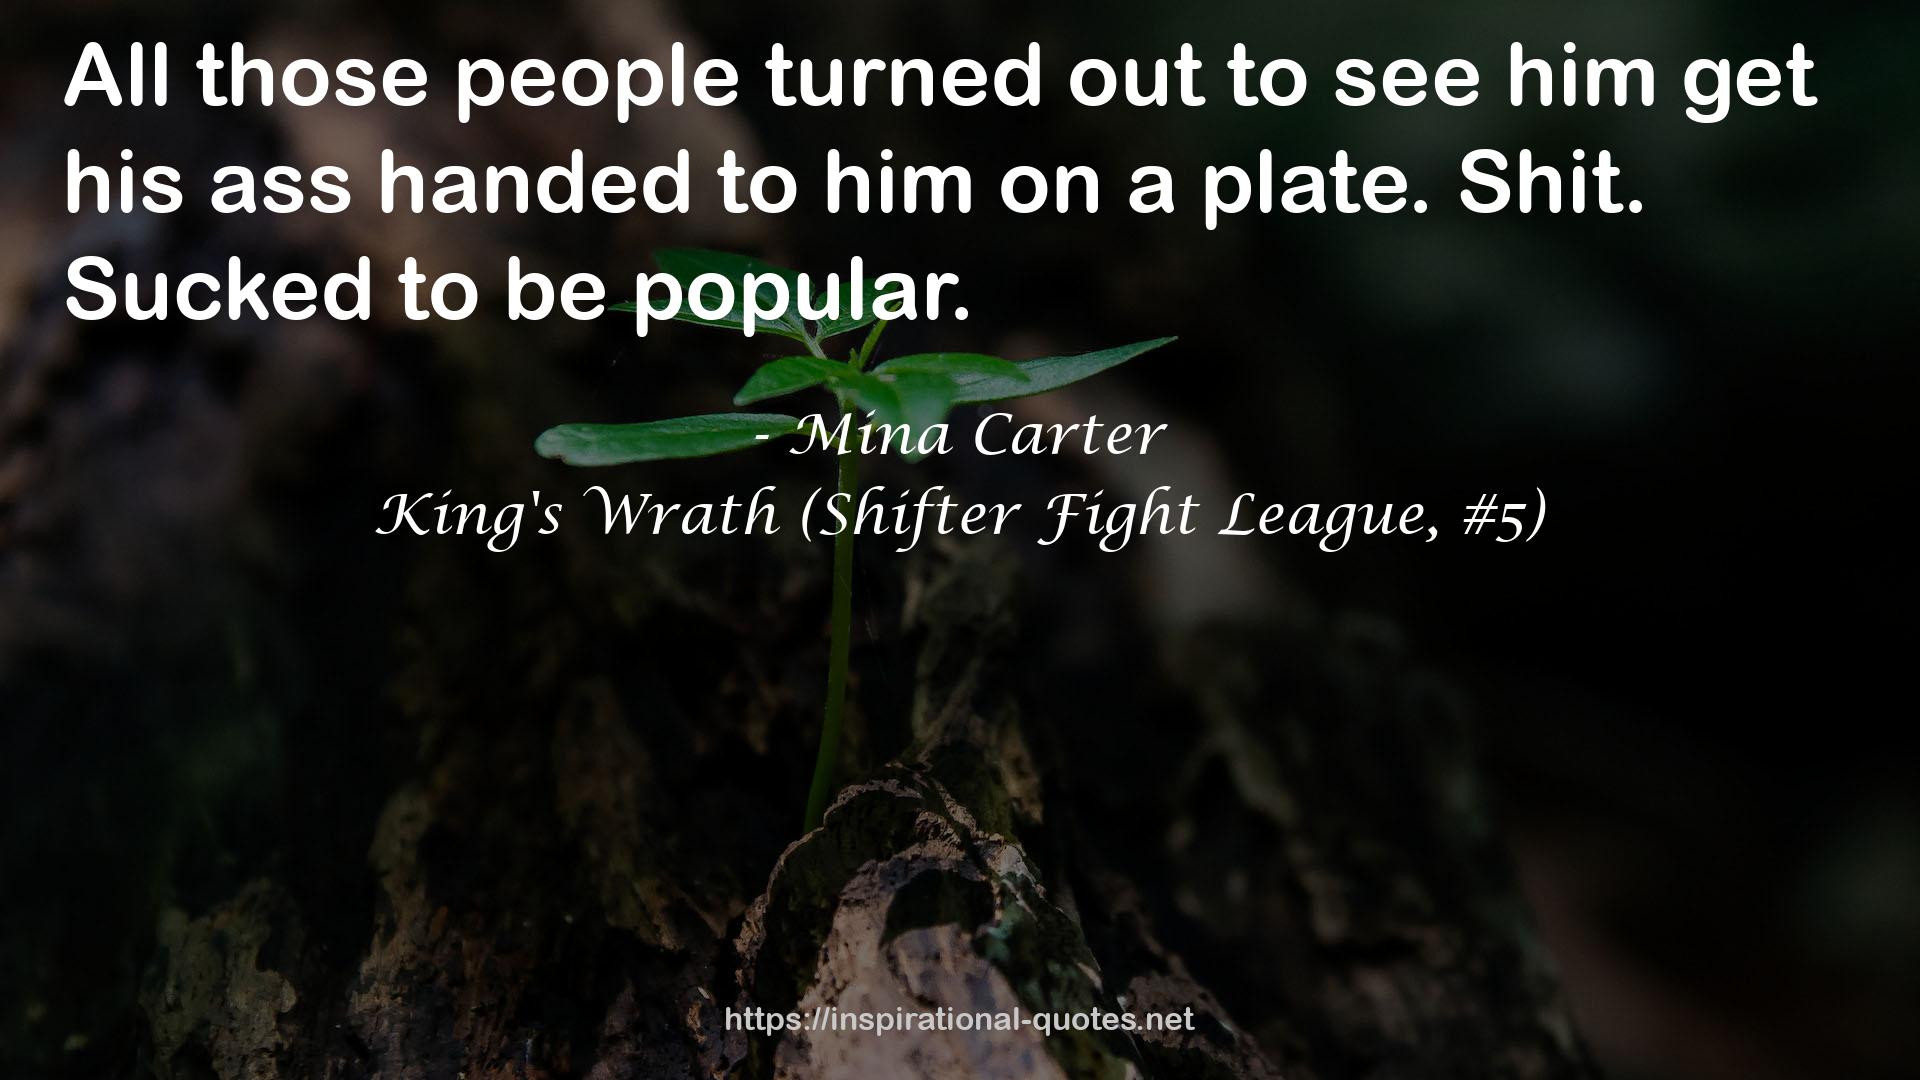 King's Wrath (Shifter Fight League, #5) QUOTES